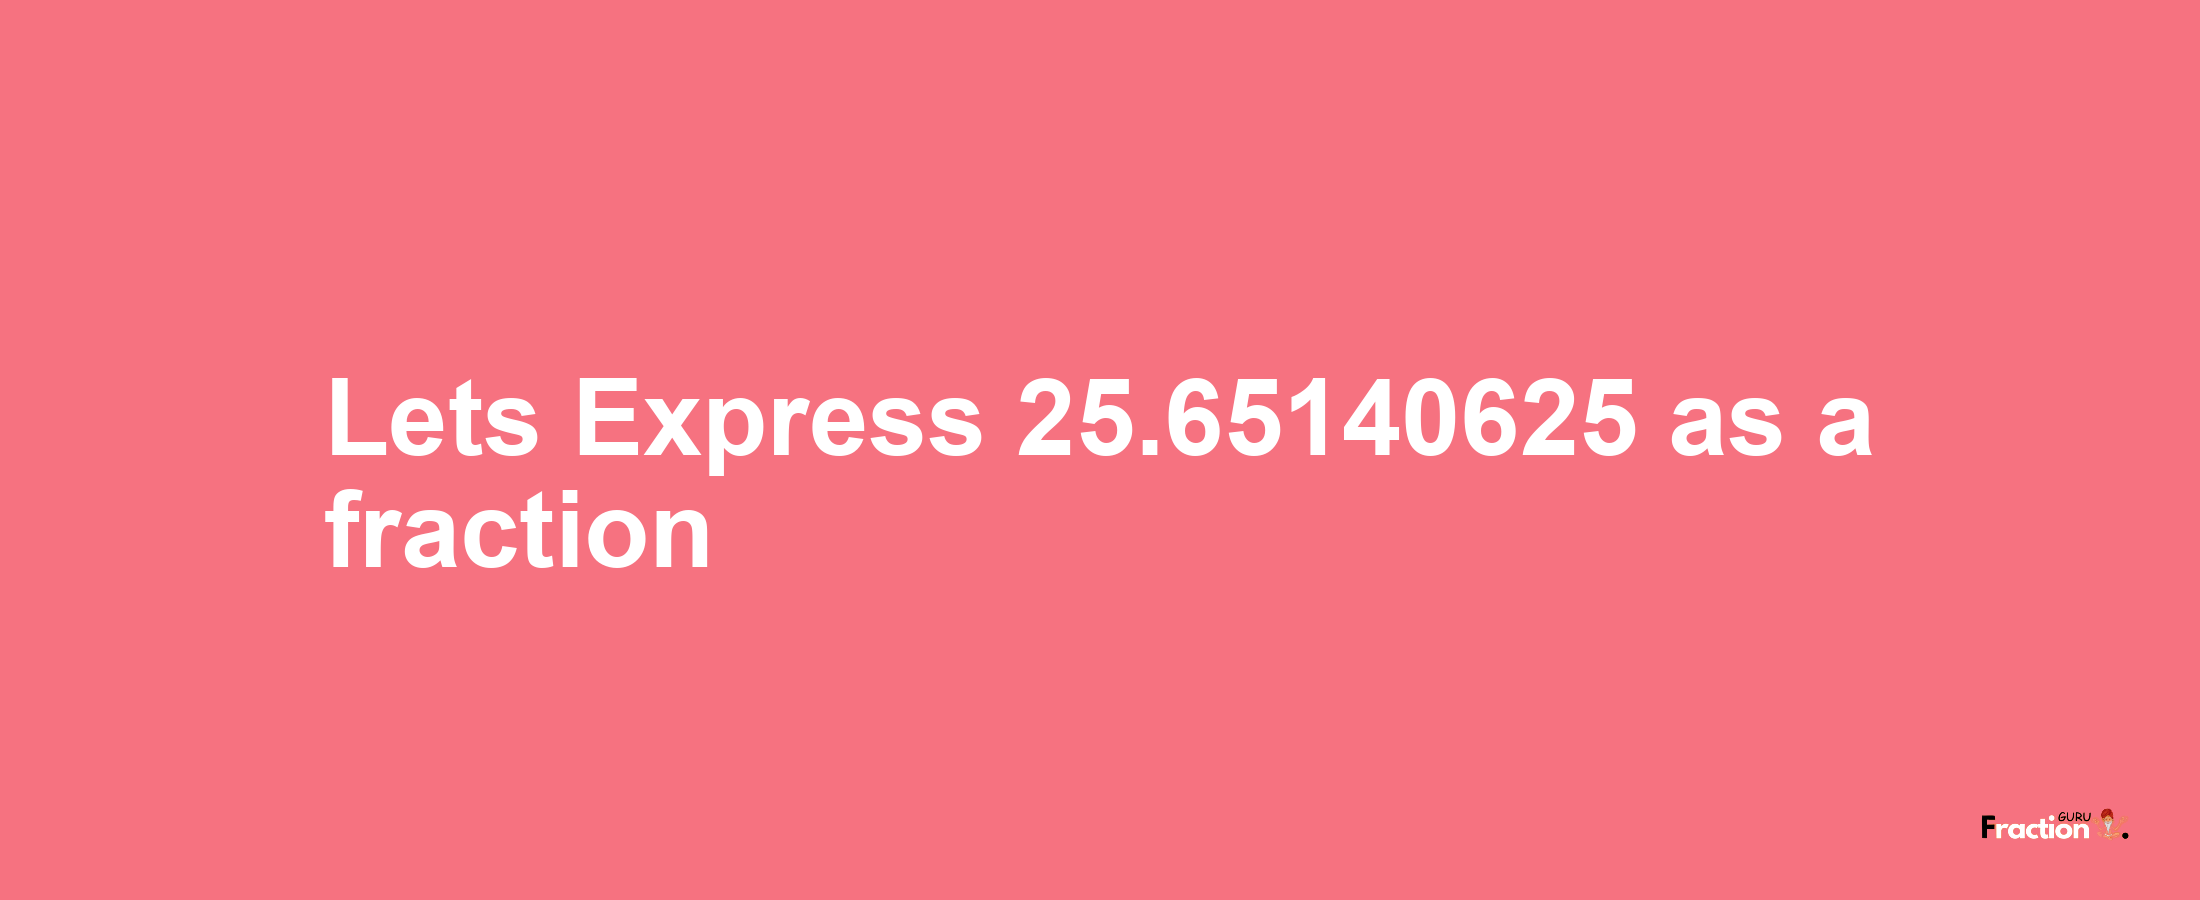 Lets Express 25.65140625 as afraction